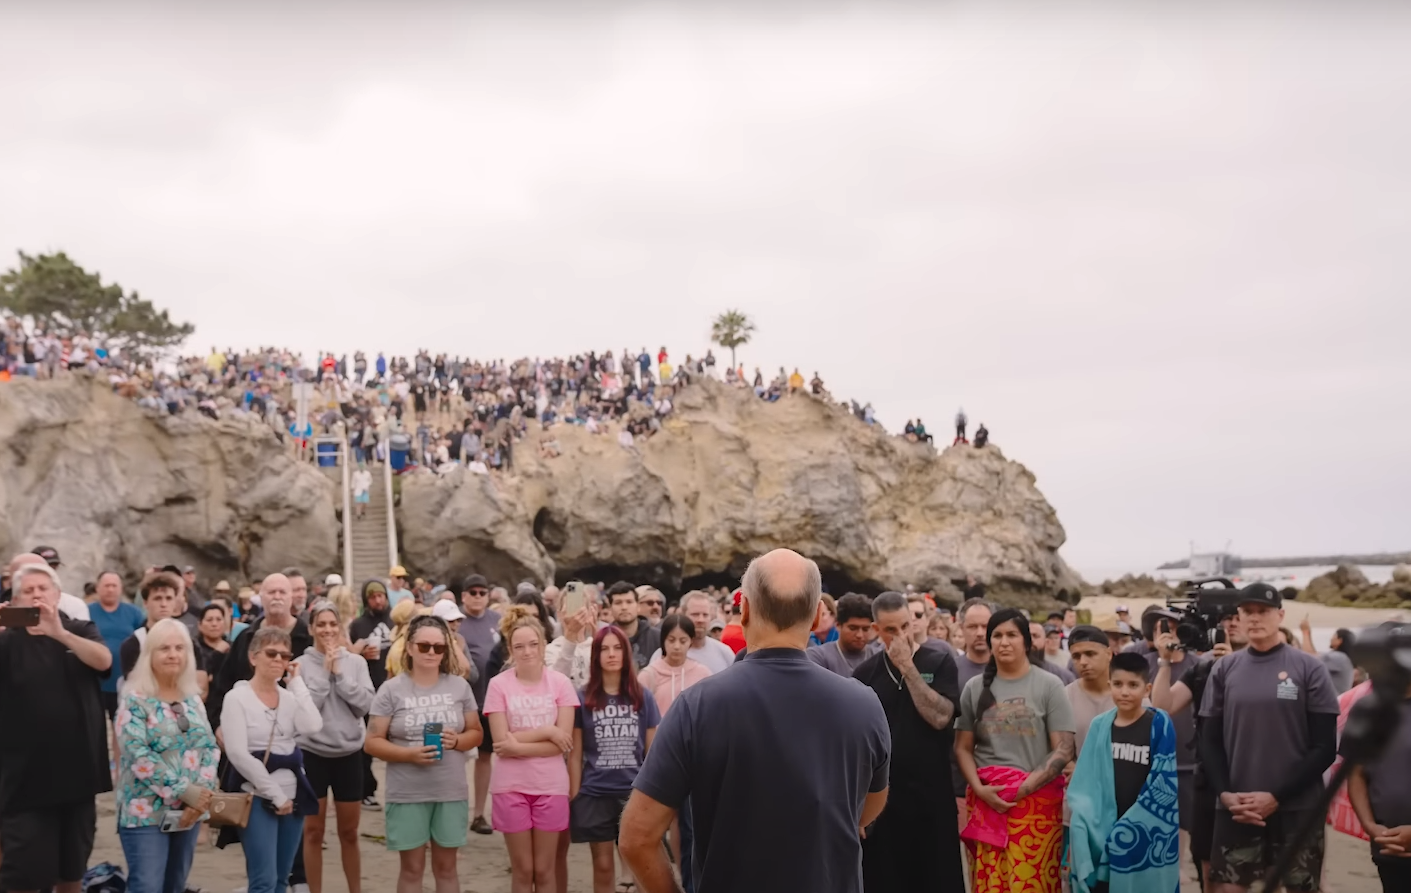 85-year-old gets baptized at historic Pirate's Cove event hosted by Greg Laurie